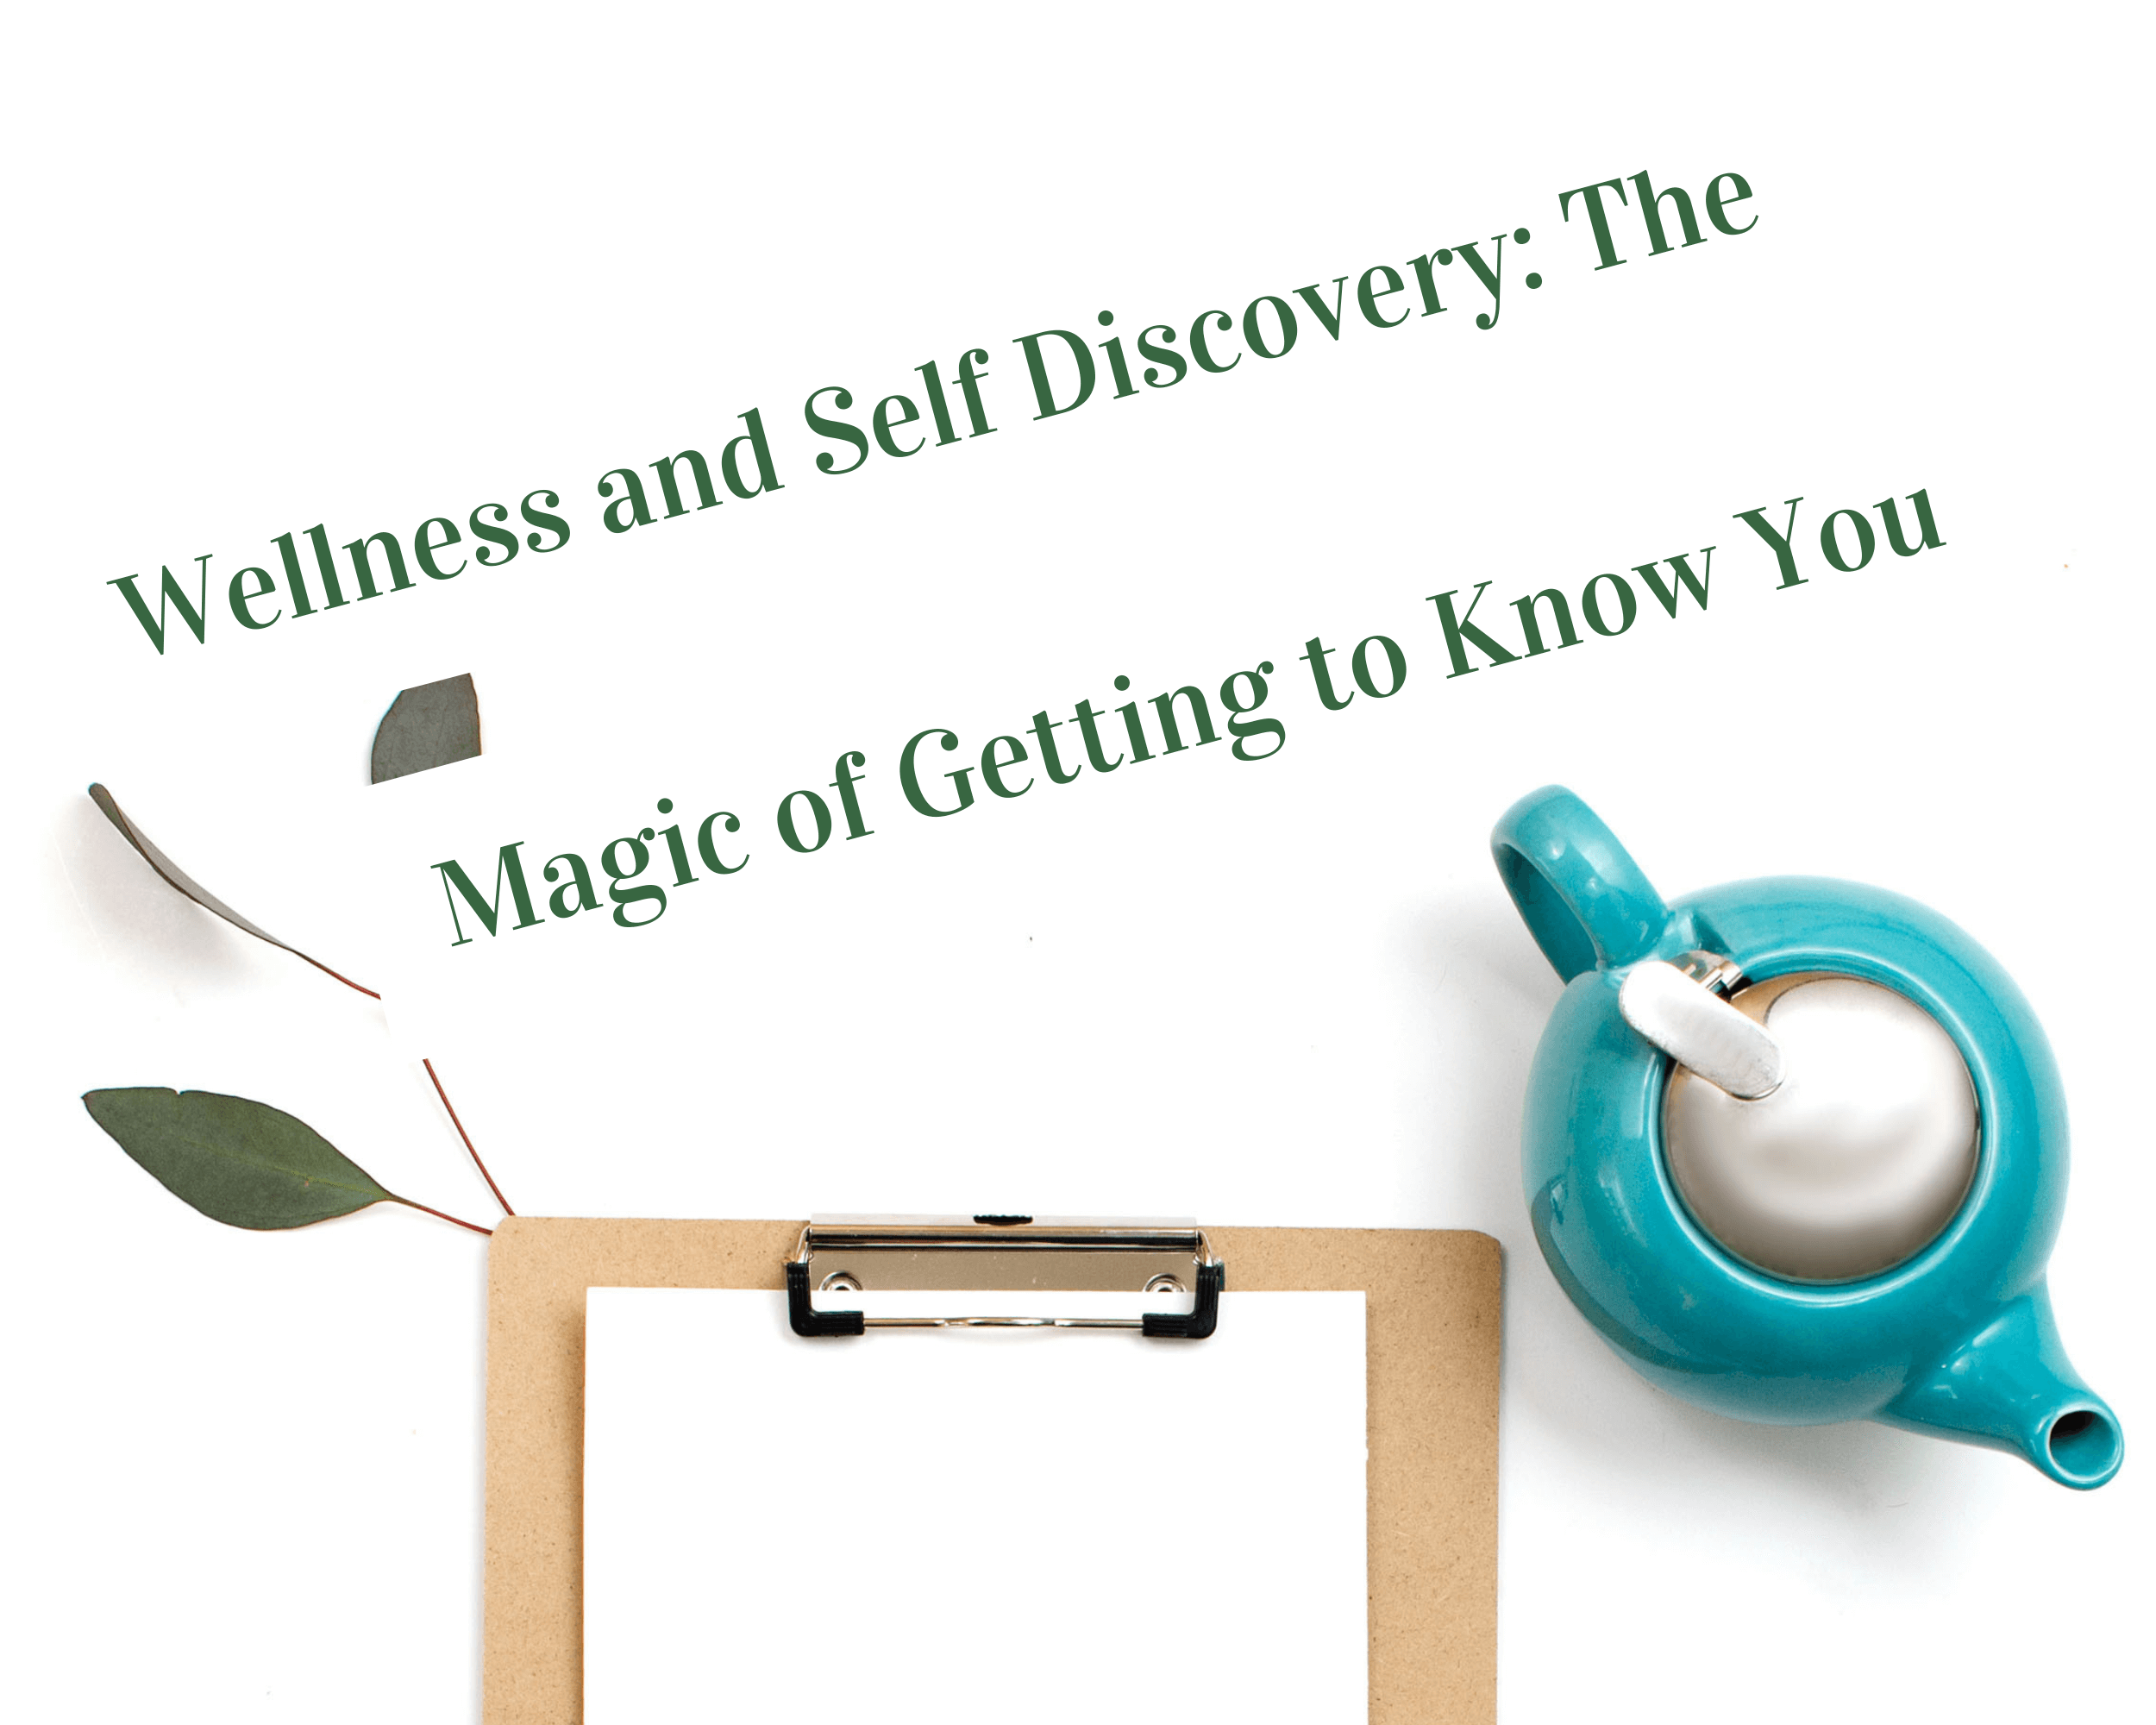 Wellness and self-discovery: the magic of getting to know you